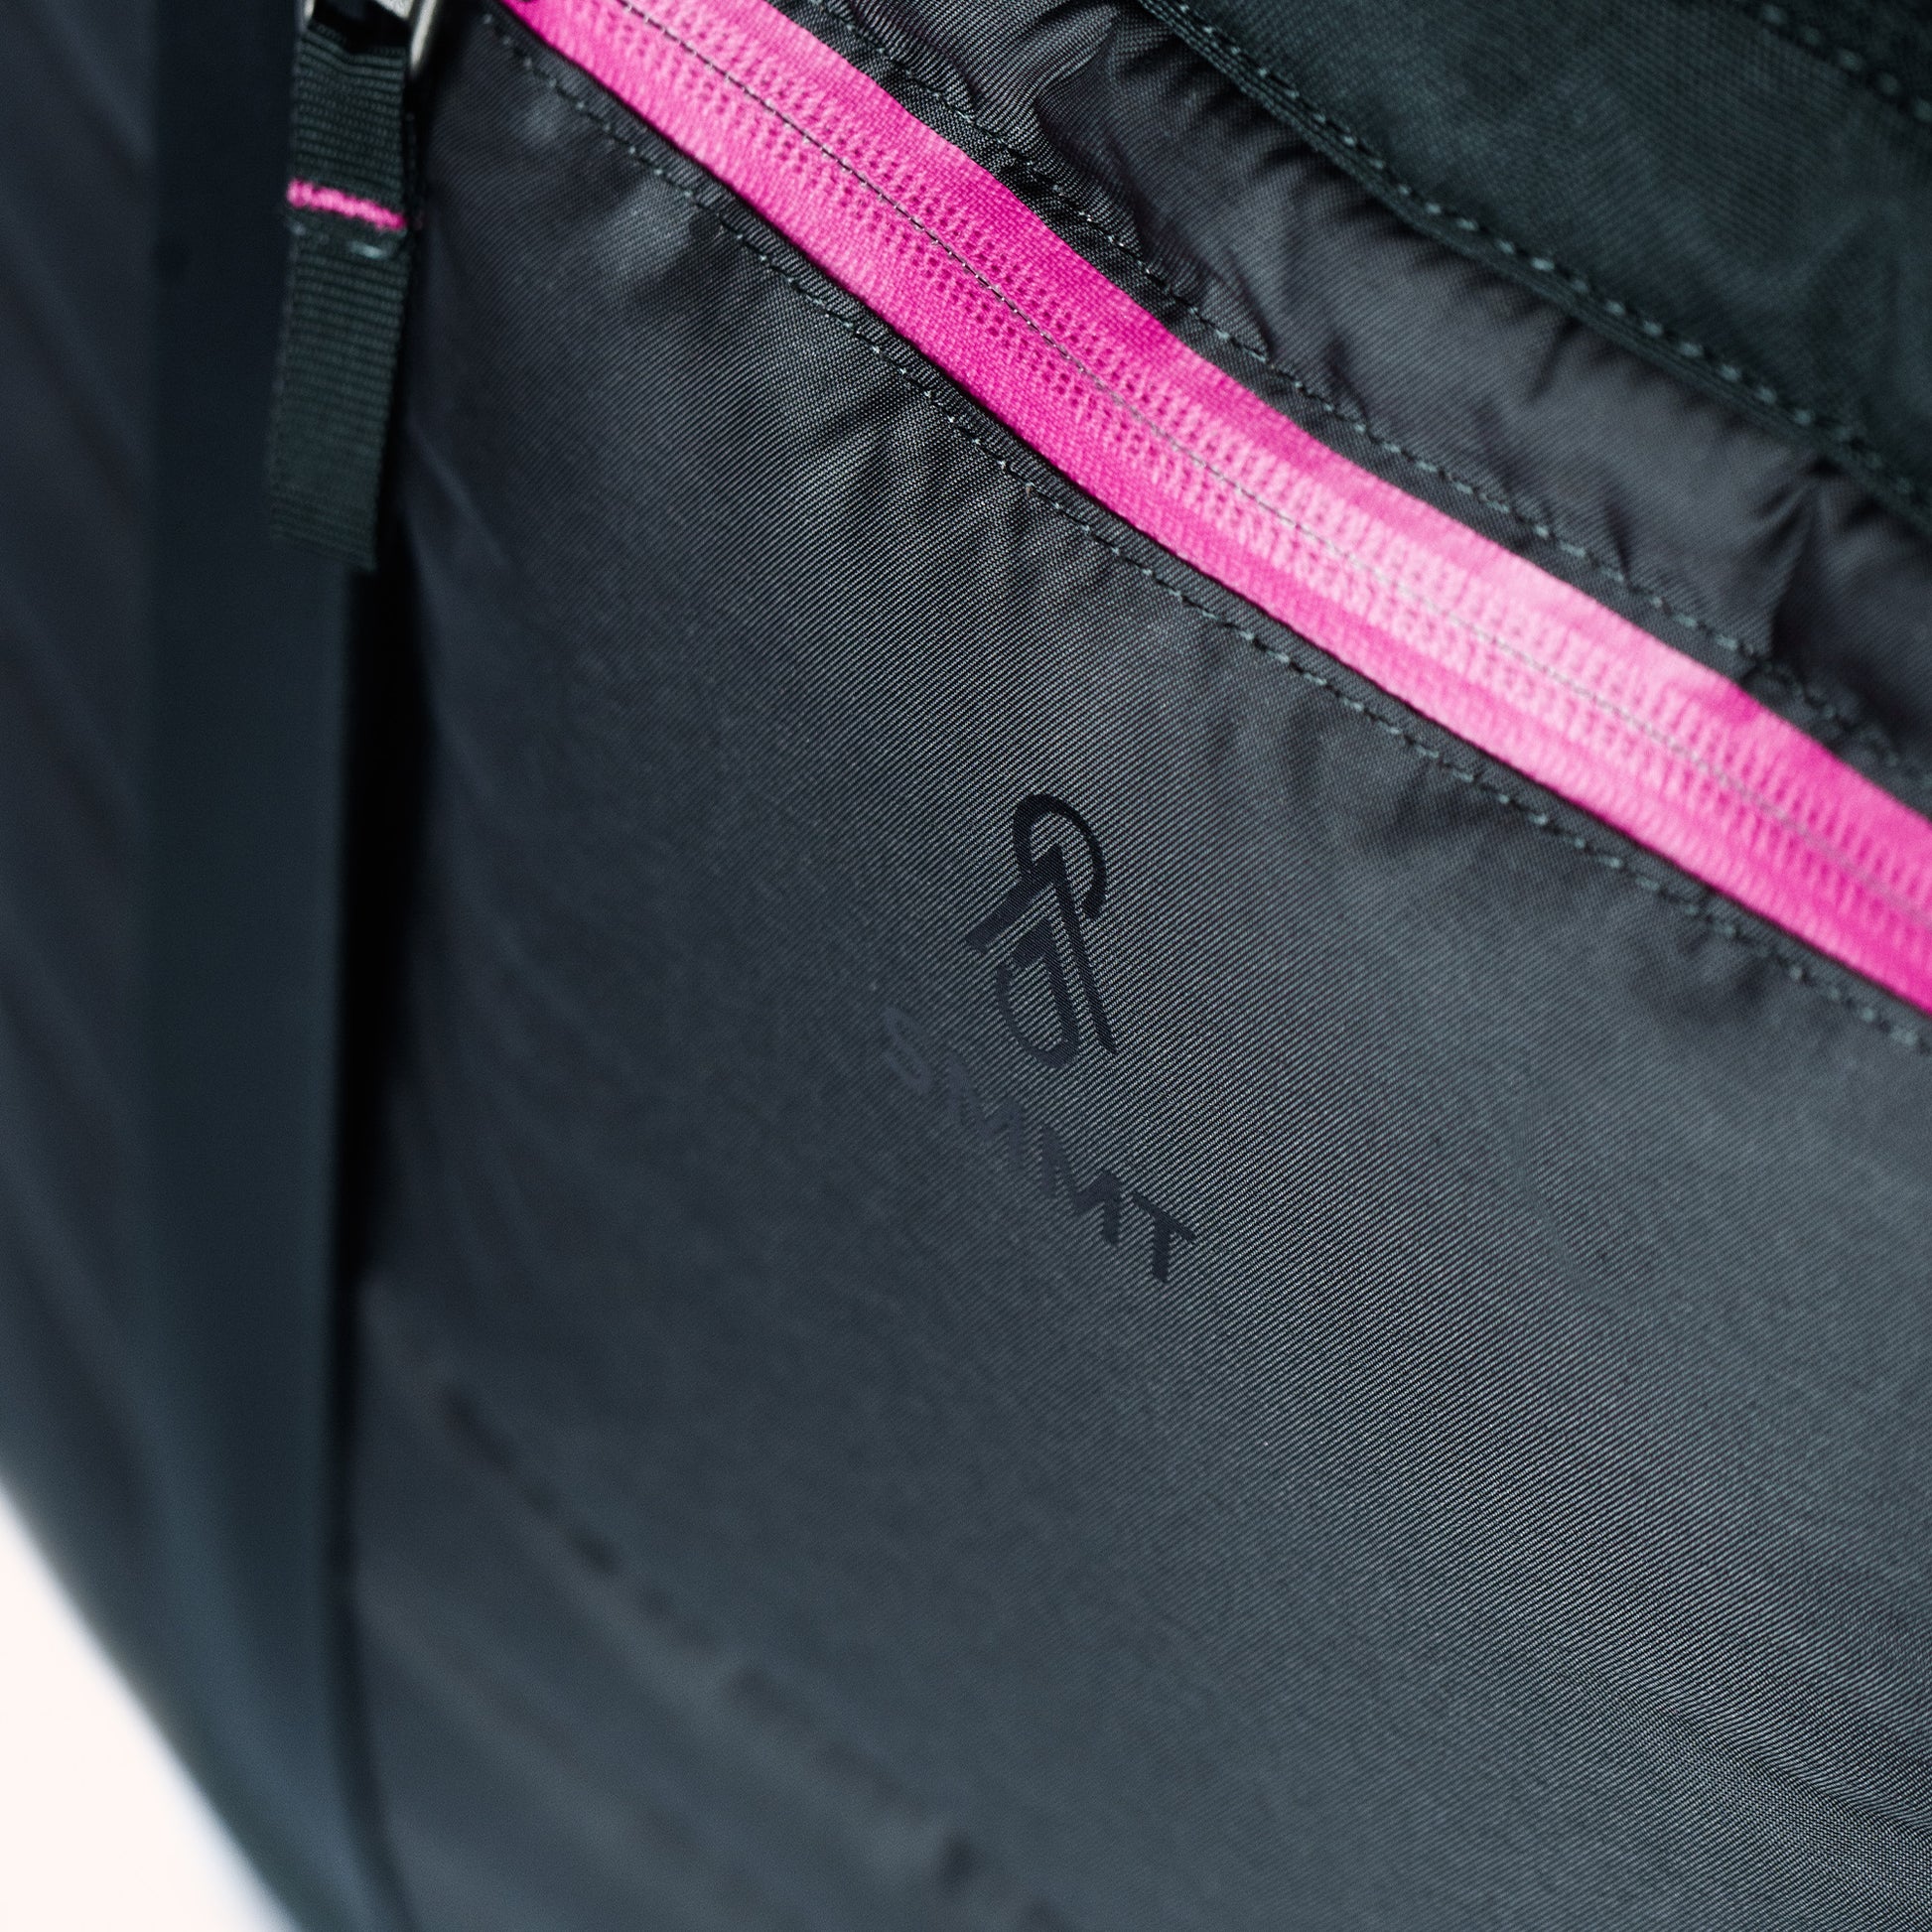 pink zipper and logo detail on outside of smmt tote bag